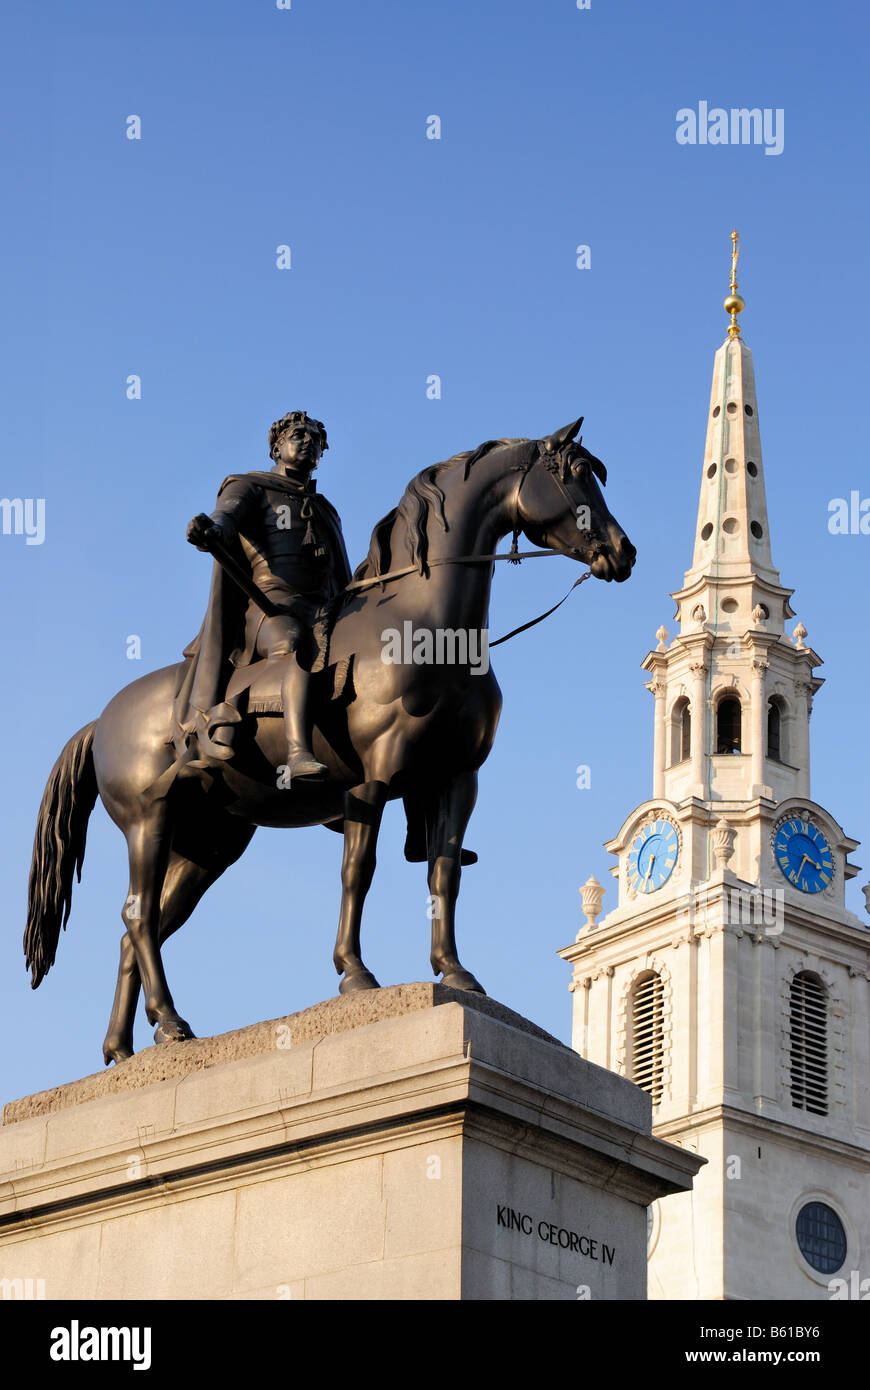 The Statue of King George 4th stands in Trafalgar Square. The church of St. Martin-in-the-Fields stands behind it. Stock Photo